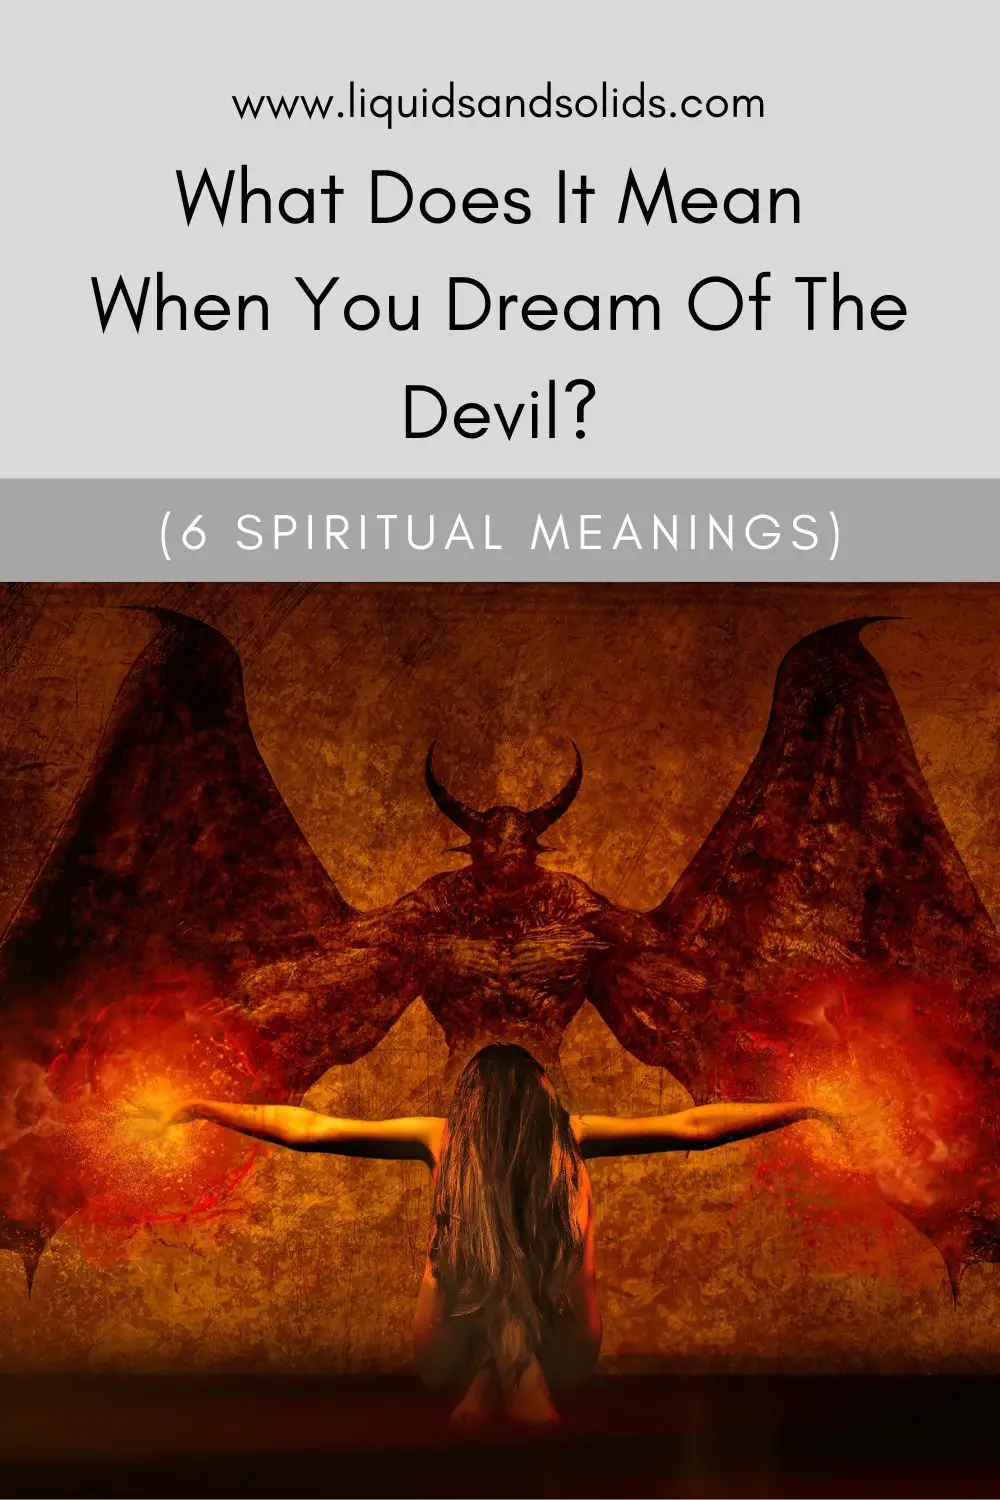 What Does It Mean To Dream Of The Devil?